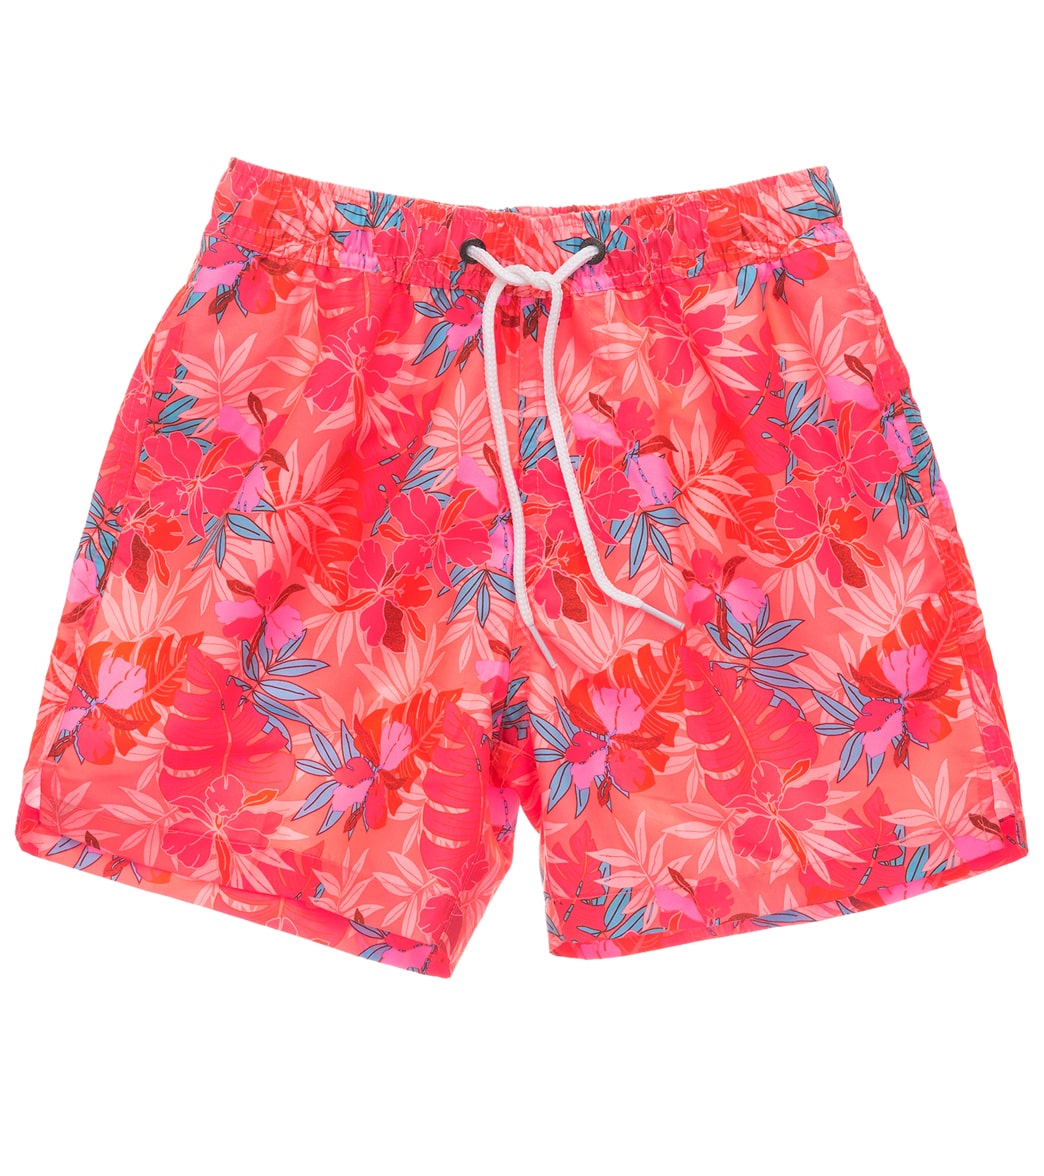 Snapper Rock Boys' Tropical Punch Volley Swim Trunk Toddler/Little/Big Kid - Red 10 - Swimoutlet.com